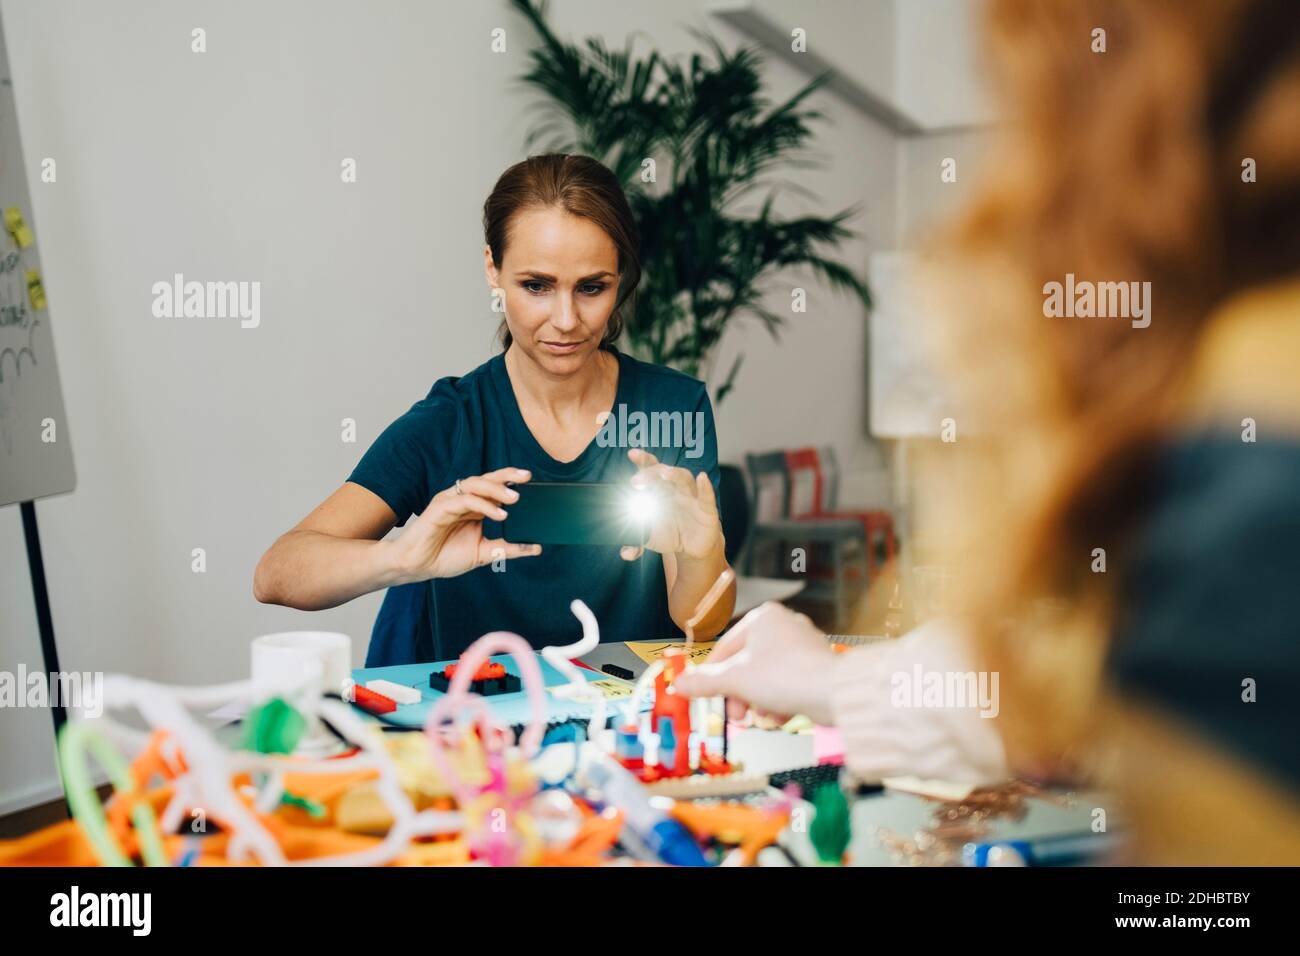 Confident businesswoman photographing stationery on table at creative office Stock Photo